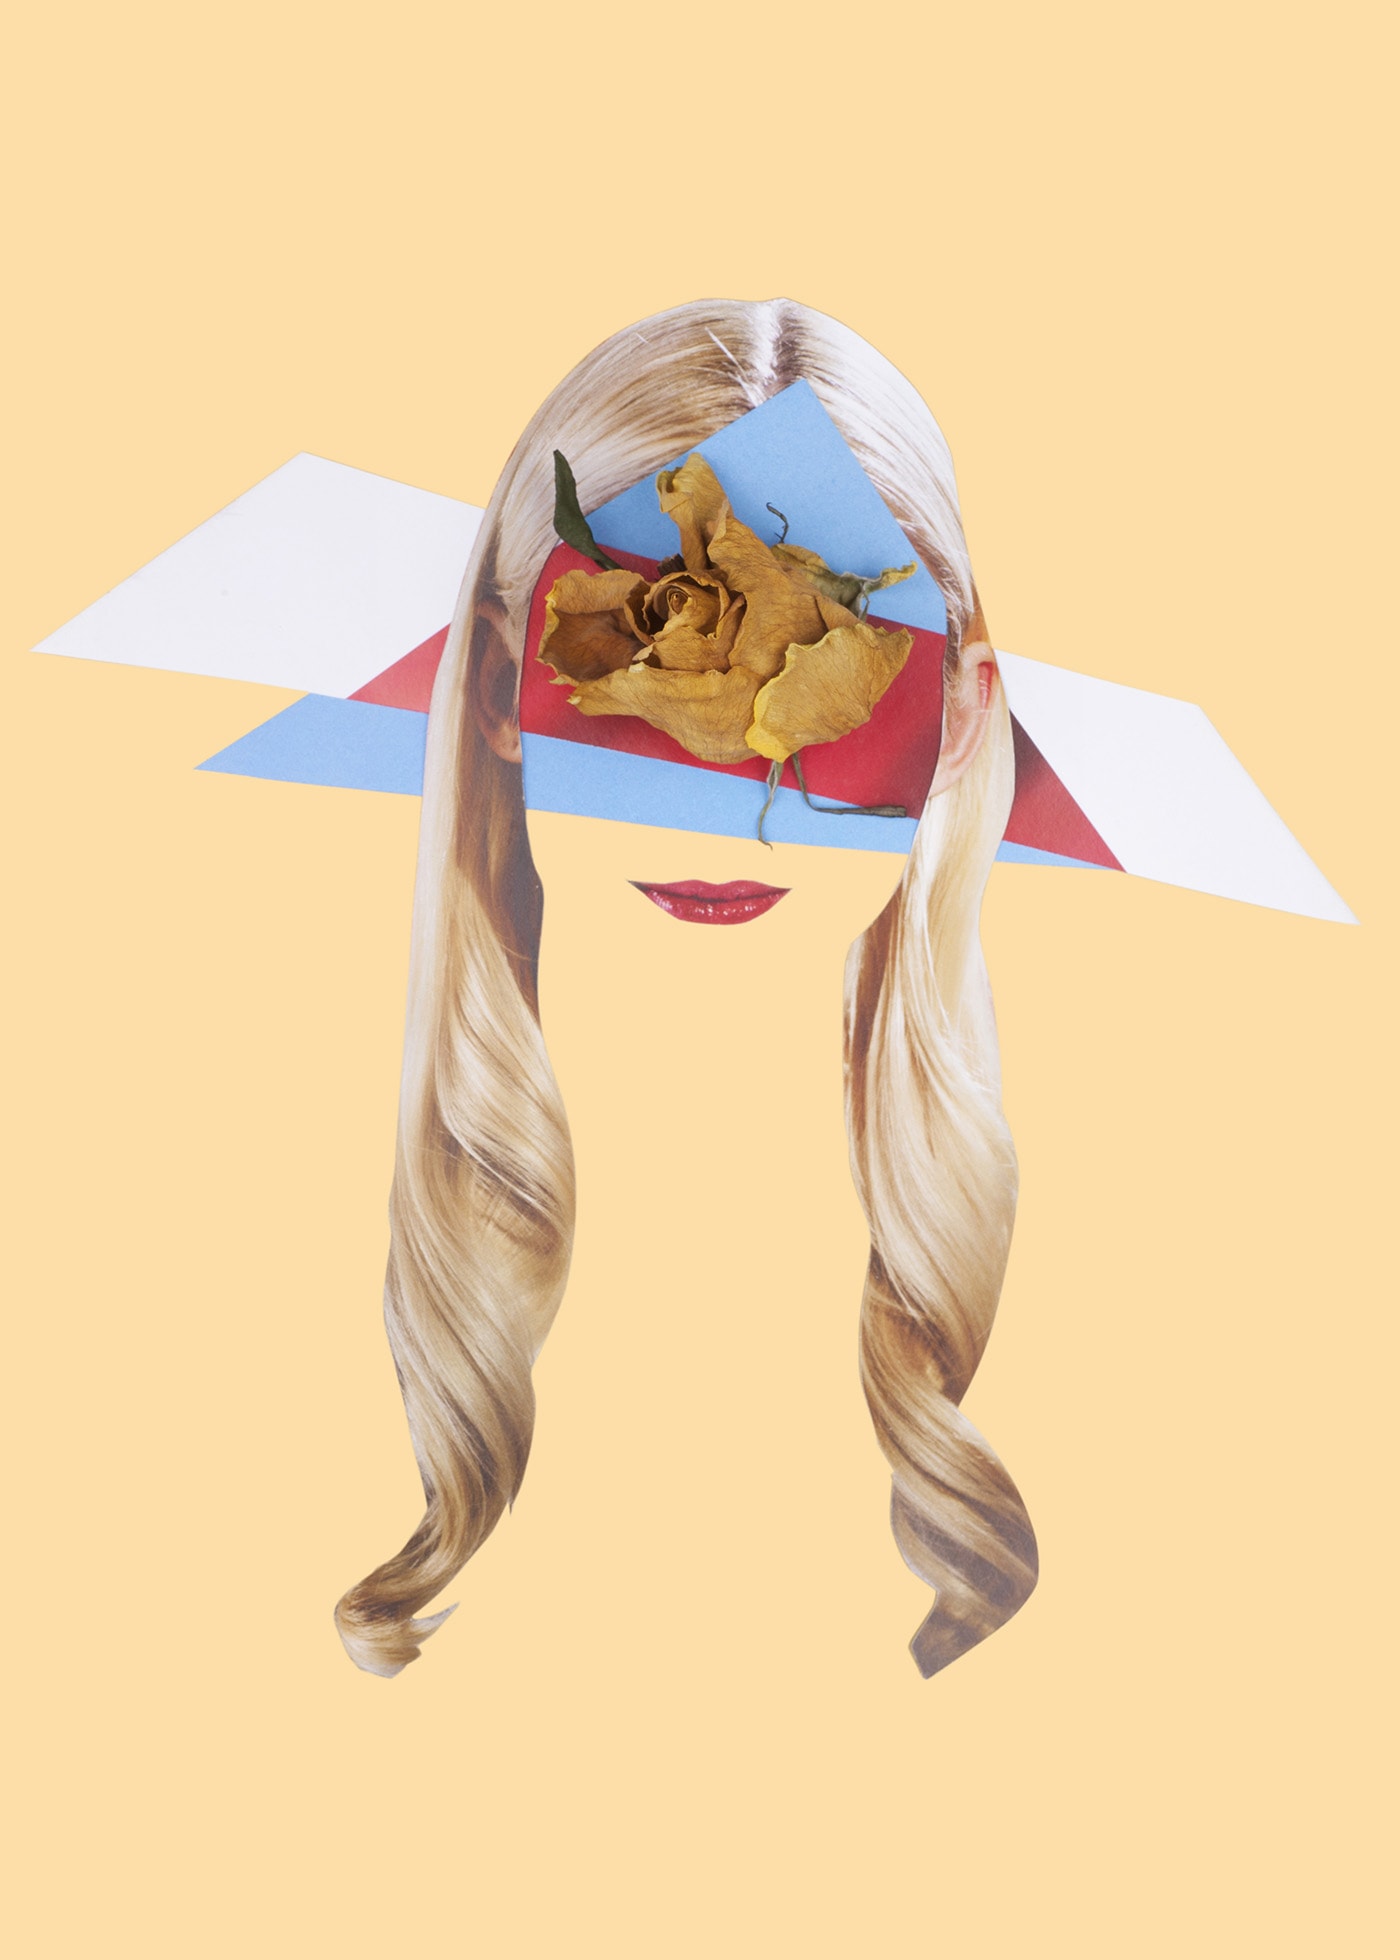 Collage of long blonde hair with geometric shapes and lips against a cream colored background